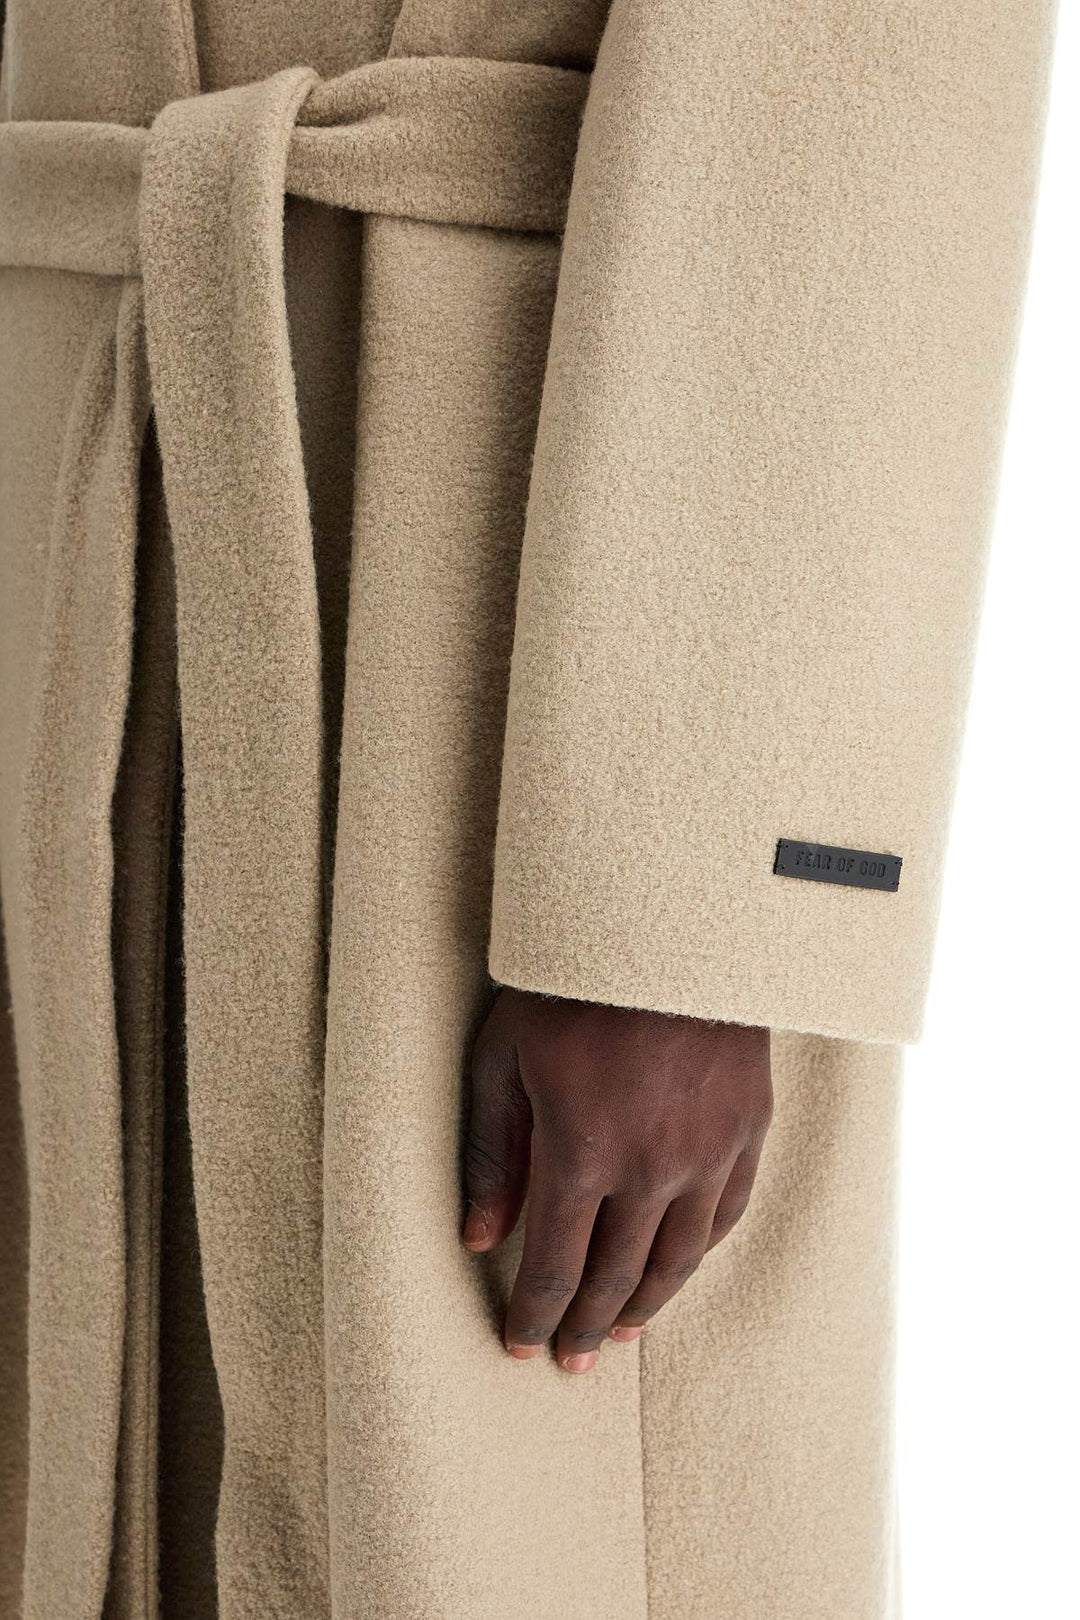 Fear Of God Wool Coat With High Collar And Boiled Wool   Beige